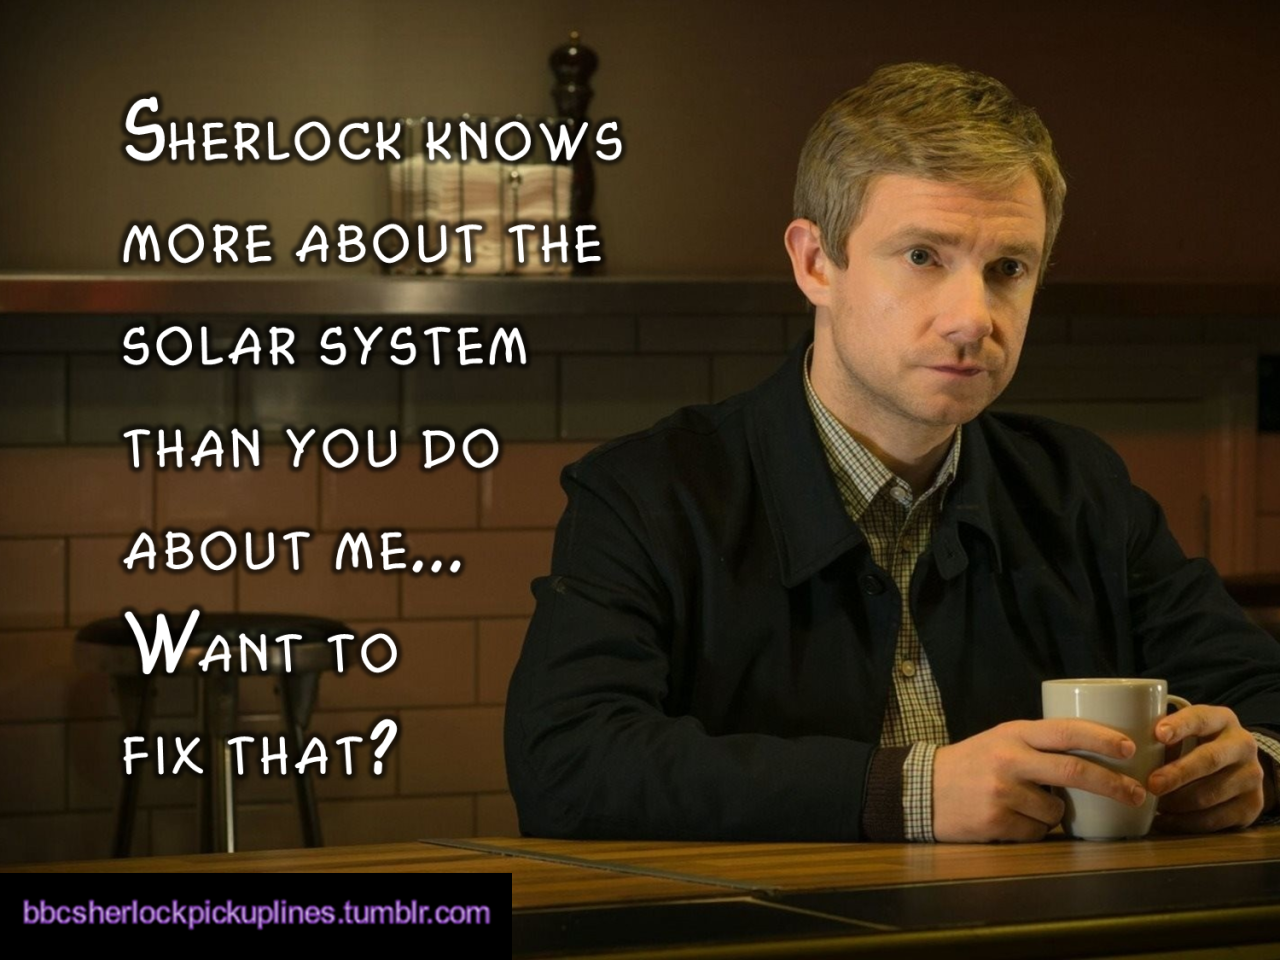 â€œSherlock knows more about the solar system than you do about me&hellip;